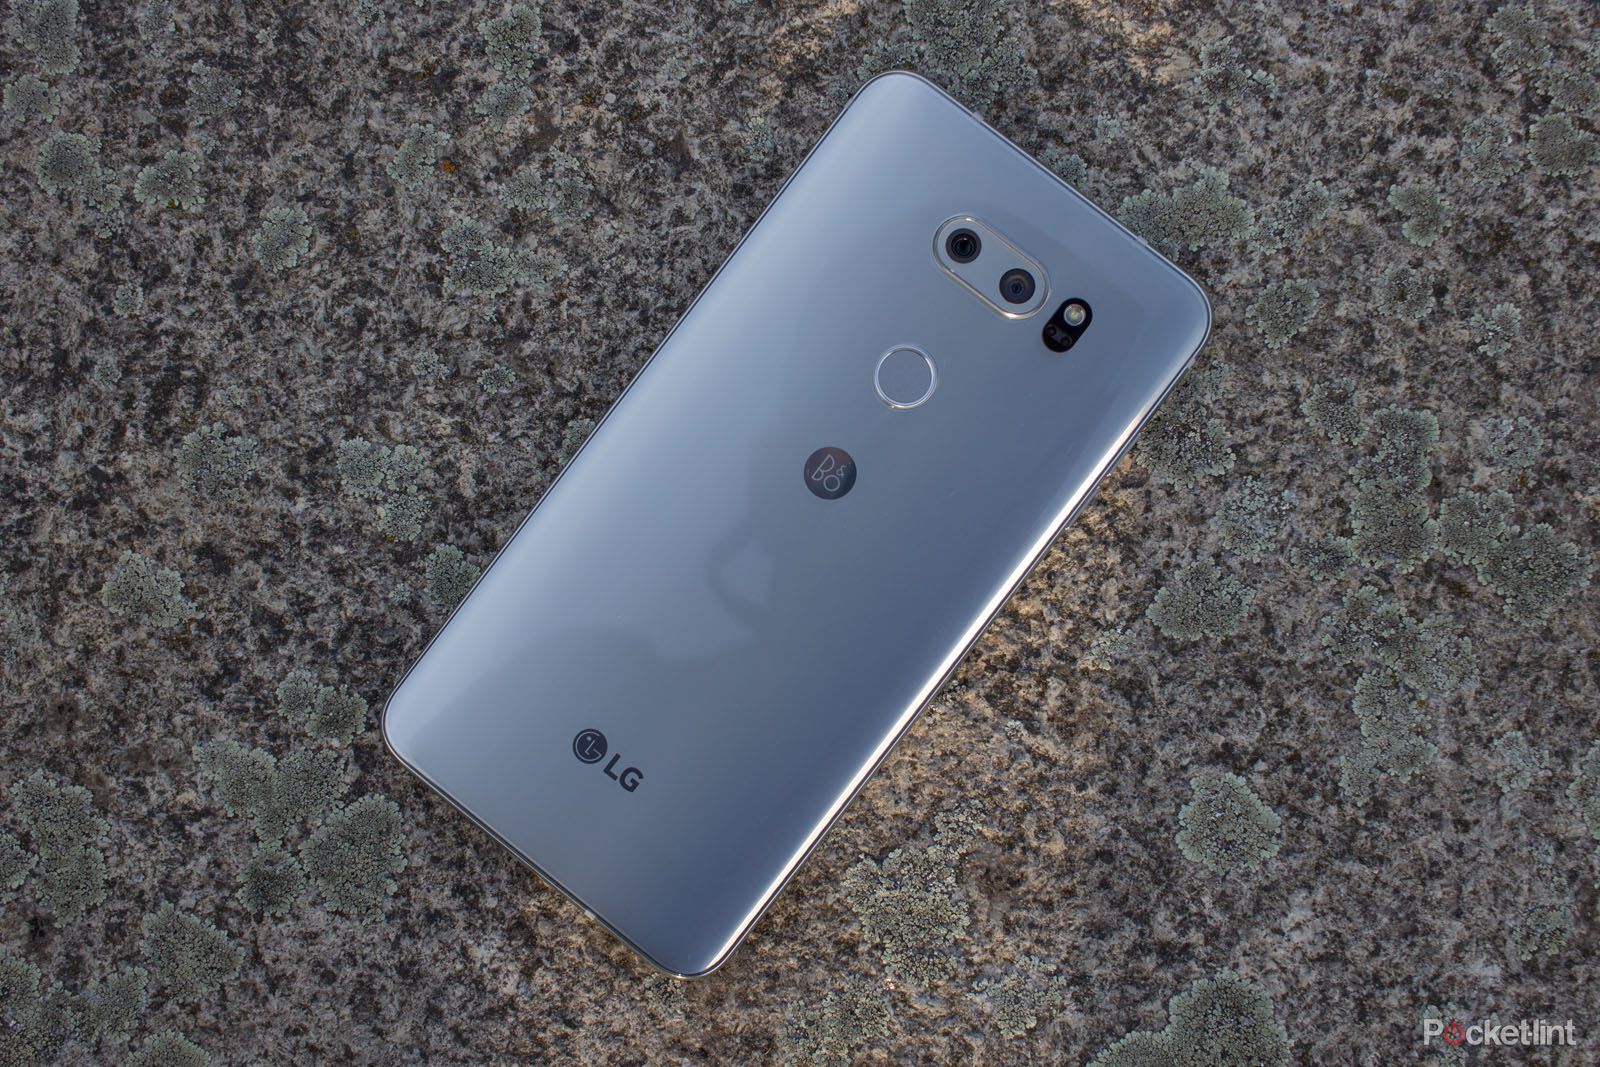 LG V30 with improved AI heading to MWC image 1